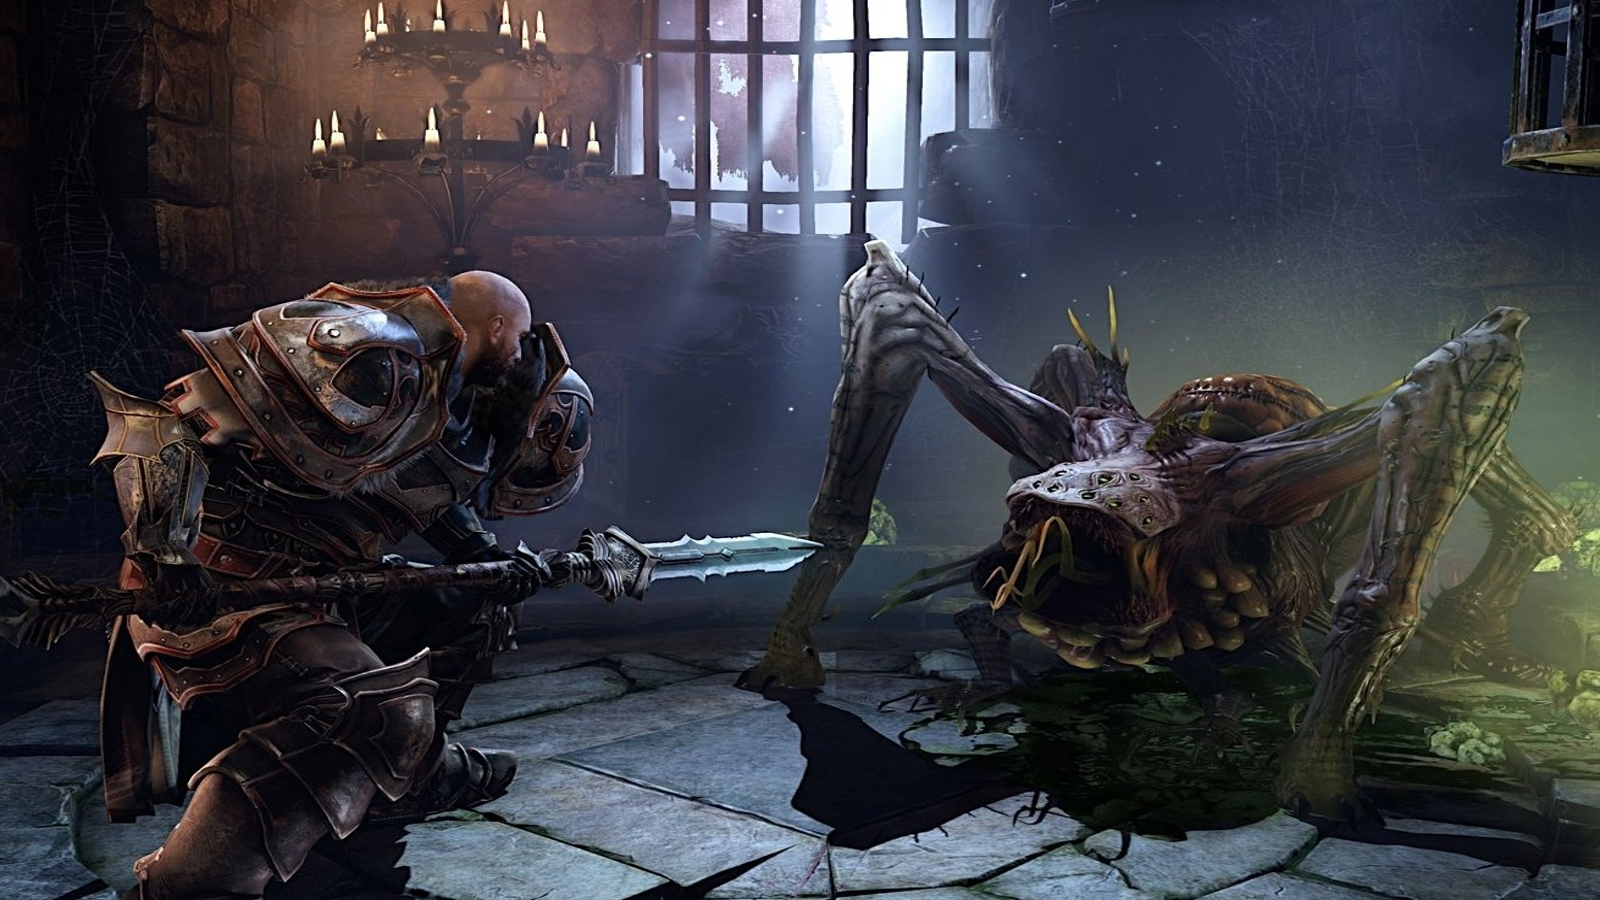 LORDS OF THE FALLEN on X: Greetings Lampbearers! A pivotal choice lies  before you, one that ties your allegiance to one of two factions, Rhogar or  Umbral. But choose wisely live tomorrow